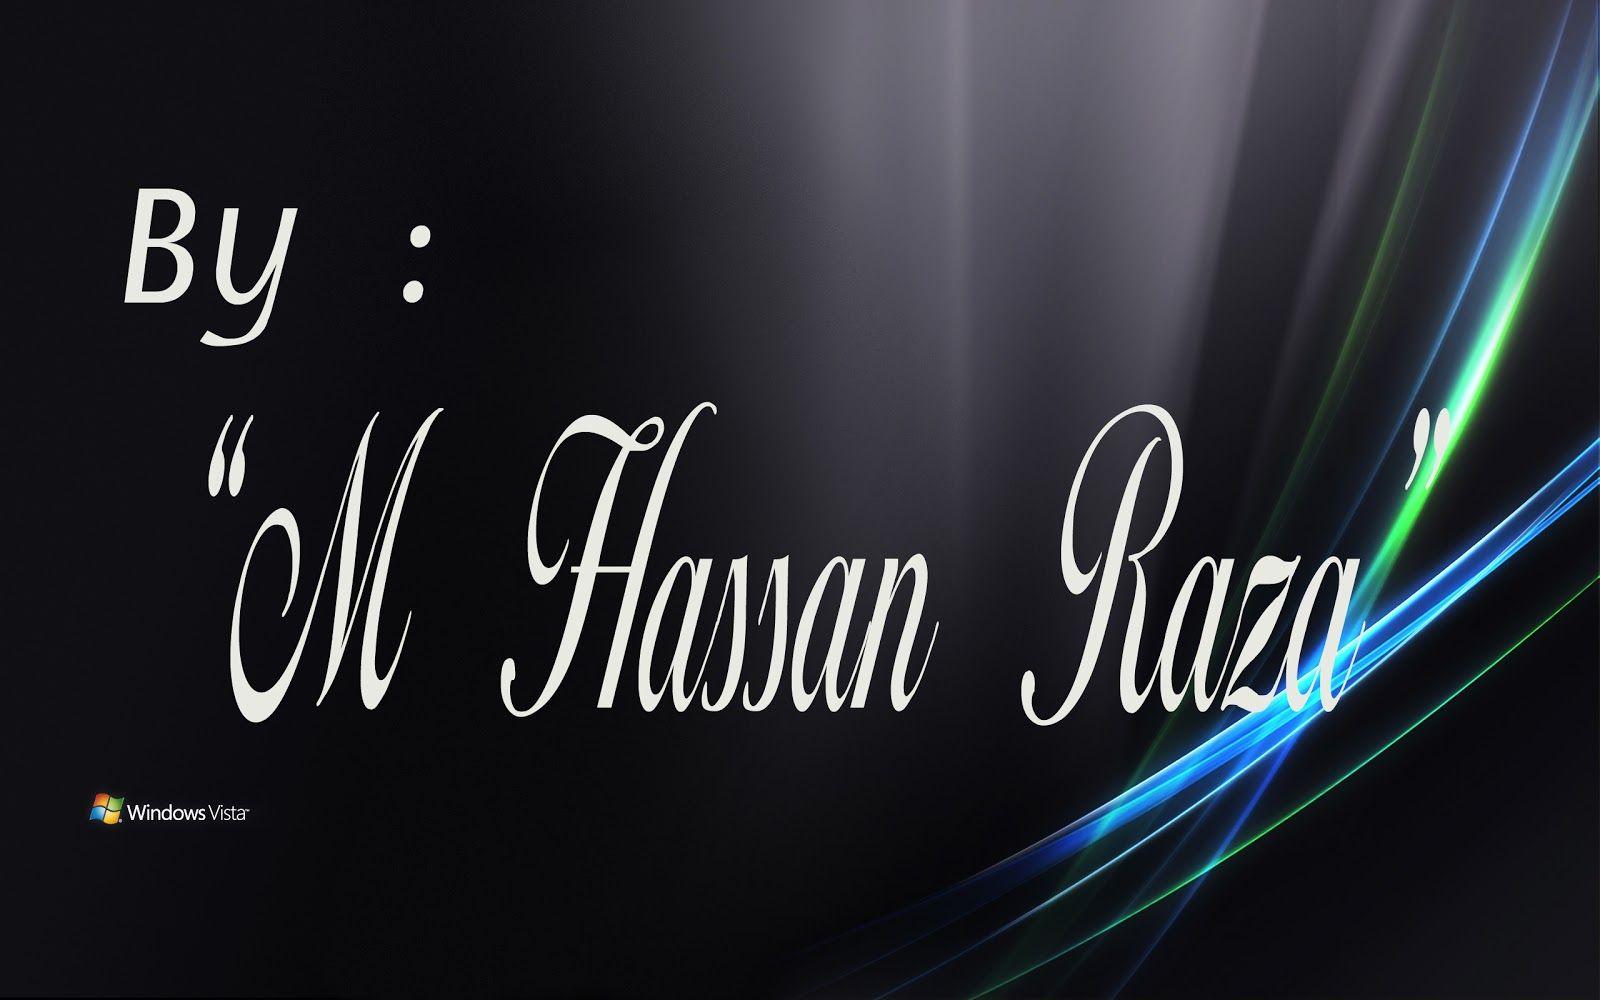 Hassan Name Wallpaper (31 Picture)